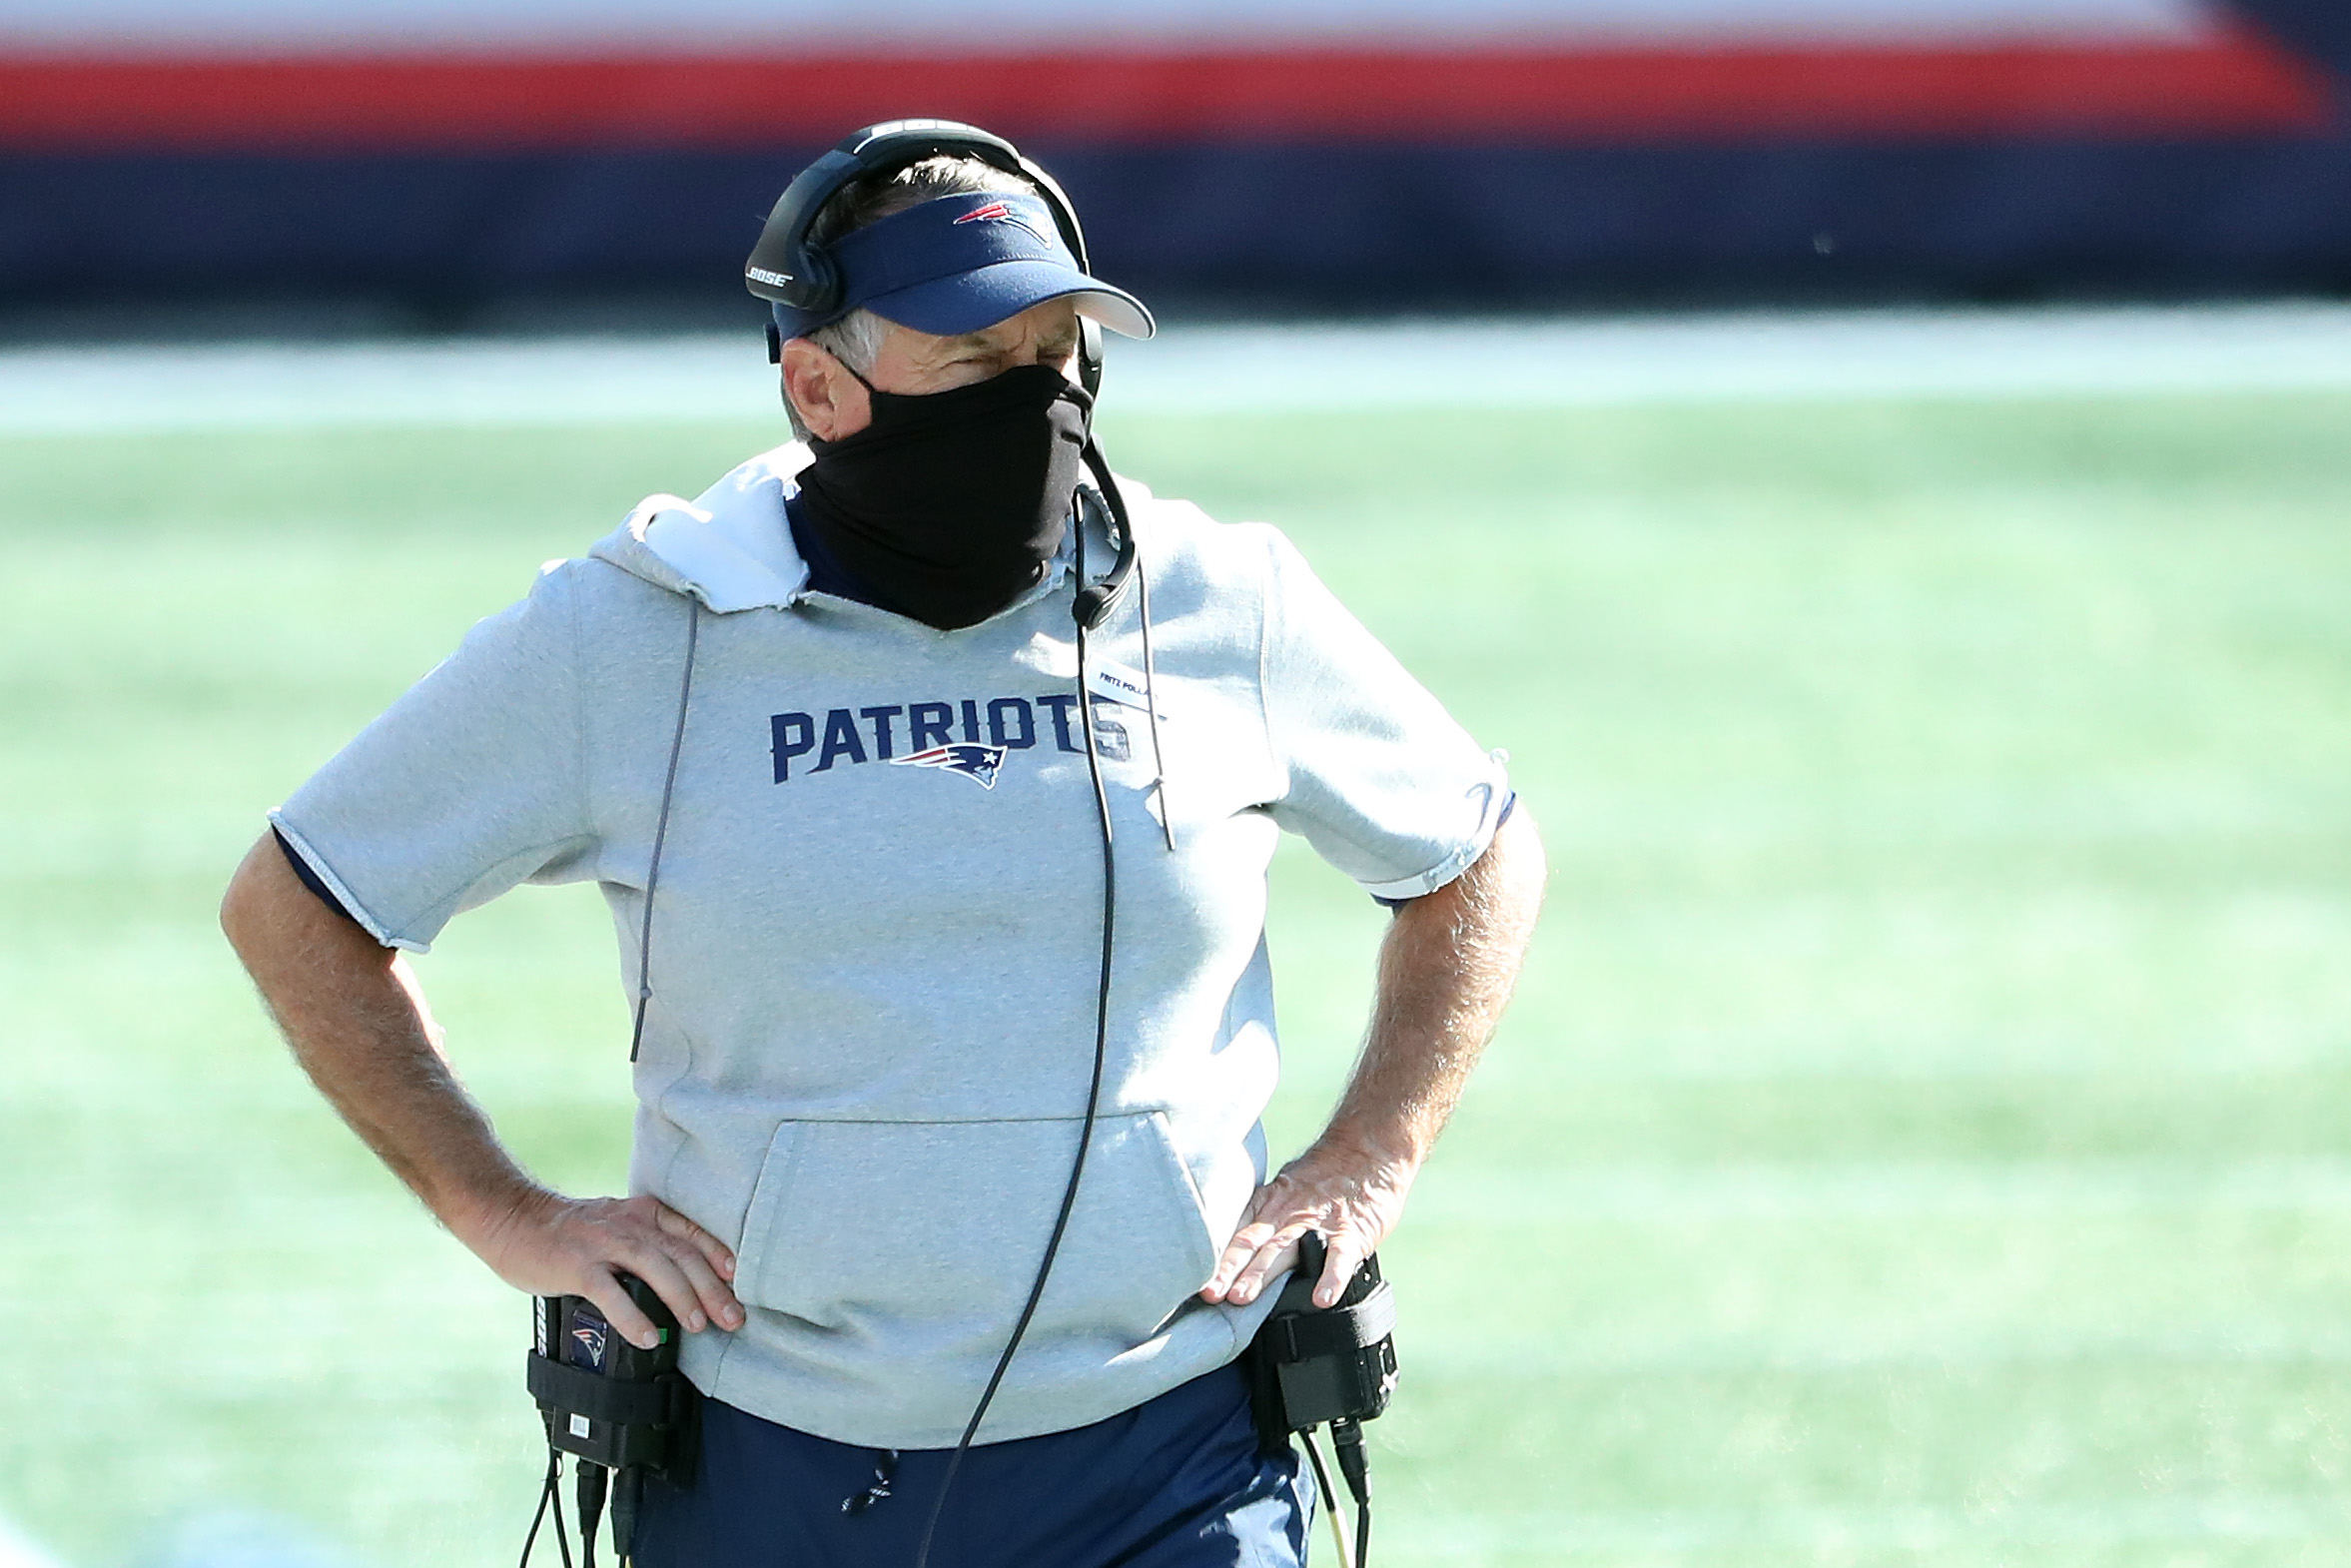 While Bill Belichick is a legendary coach, even he might not be able to solve the New England Patriots' current problems.